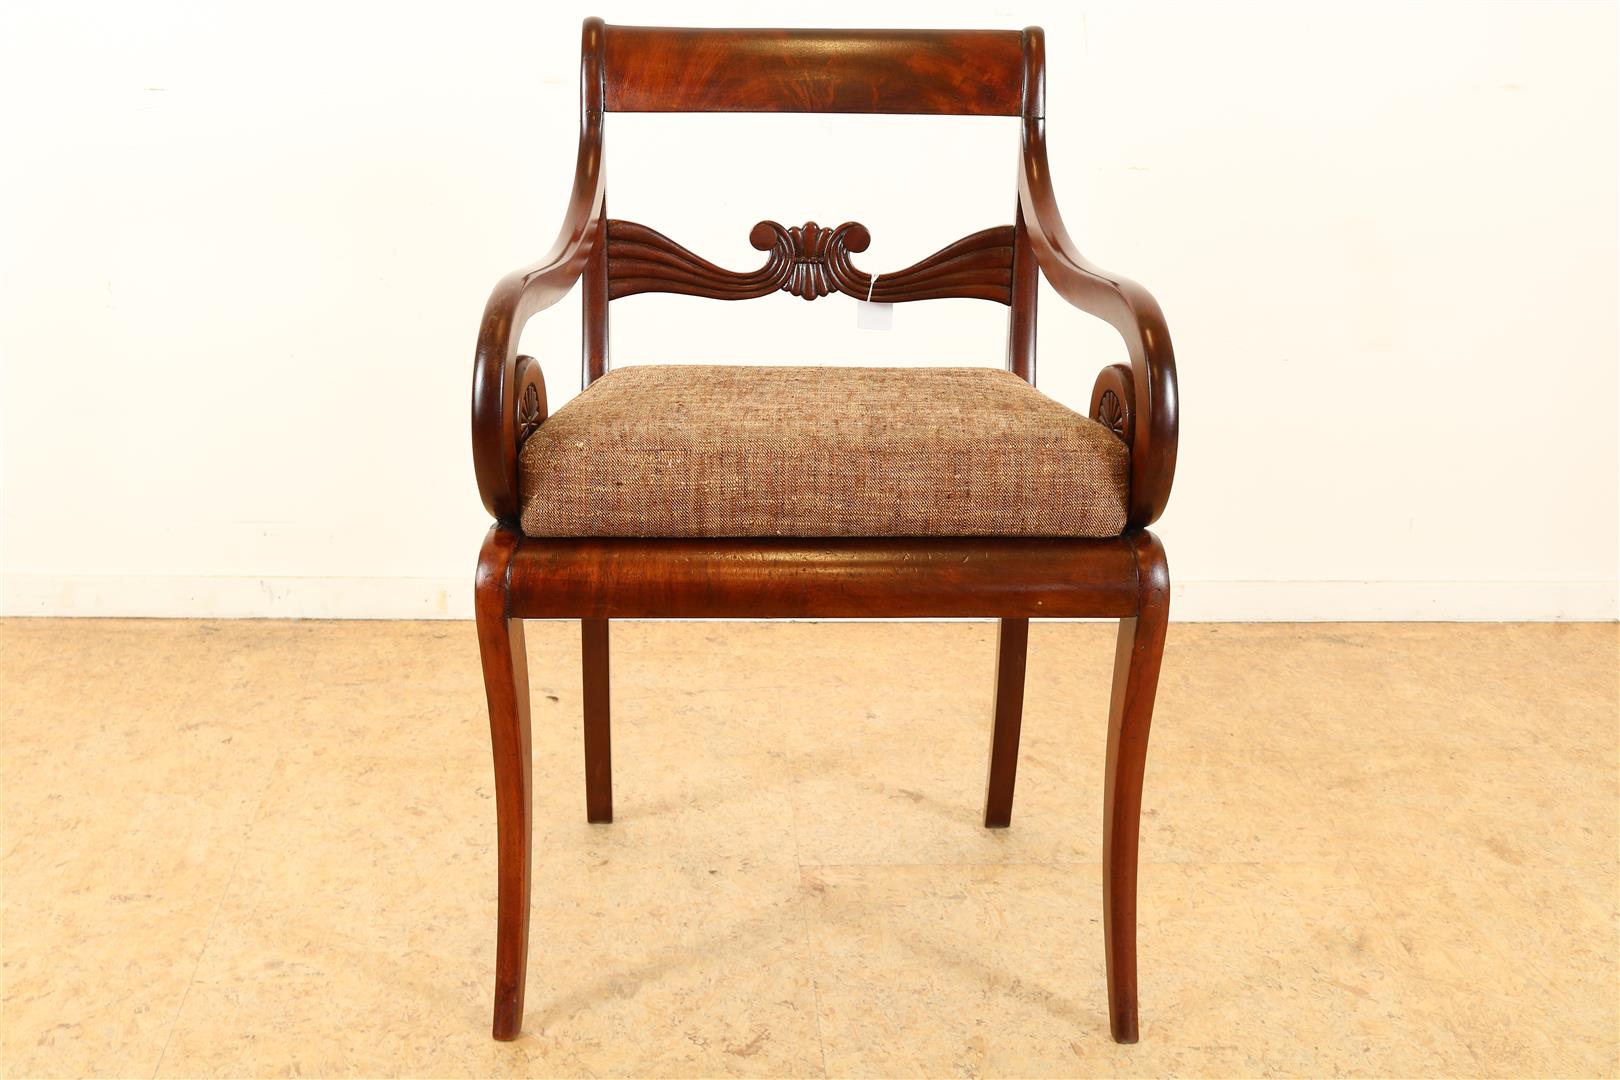 Mahogany Empire office chair with fabric seat, late 19th century.